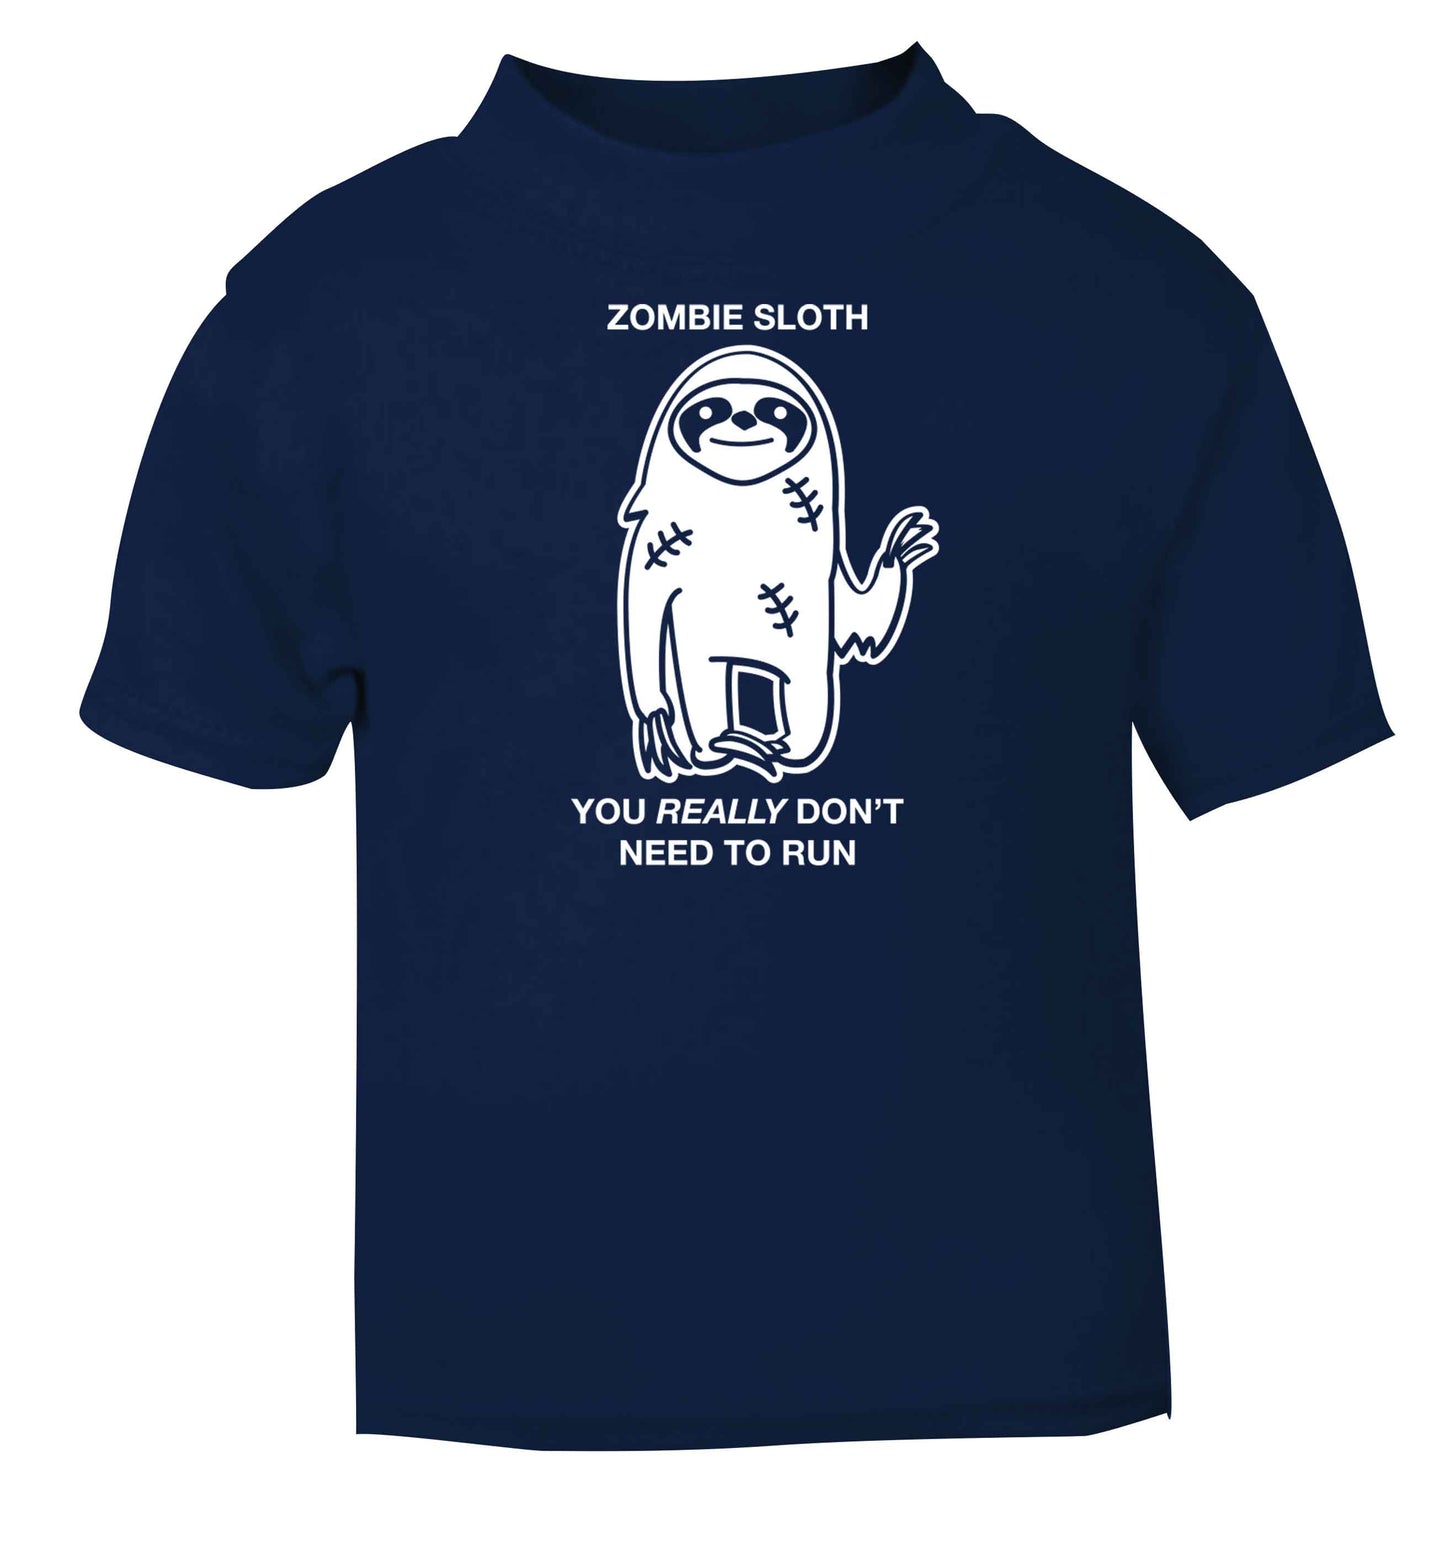 Zombie sloth you really don't need to run navy baby toddler Tshirt 2 Years